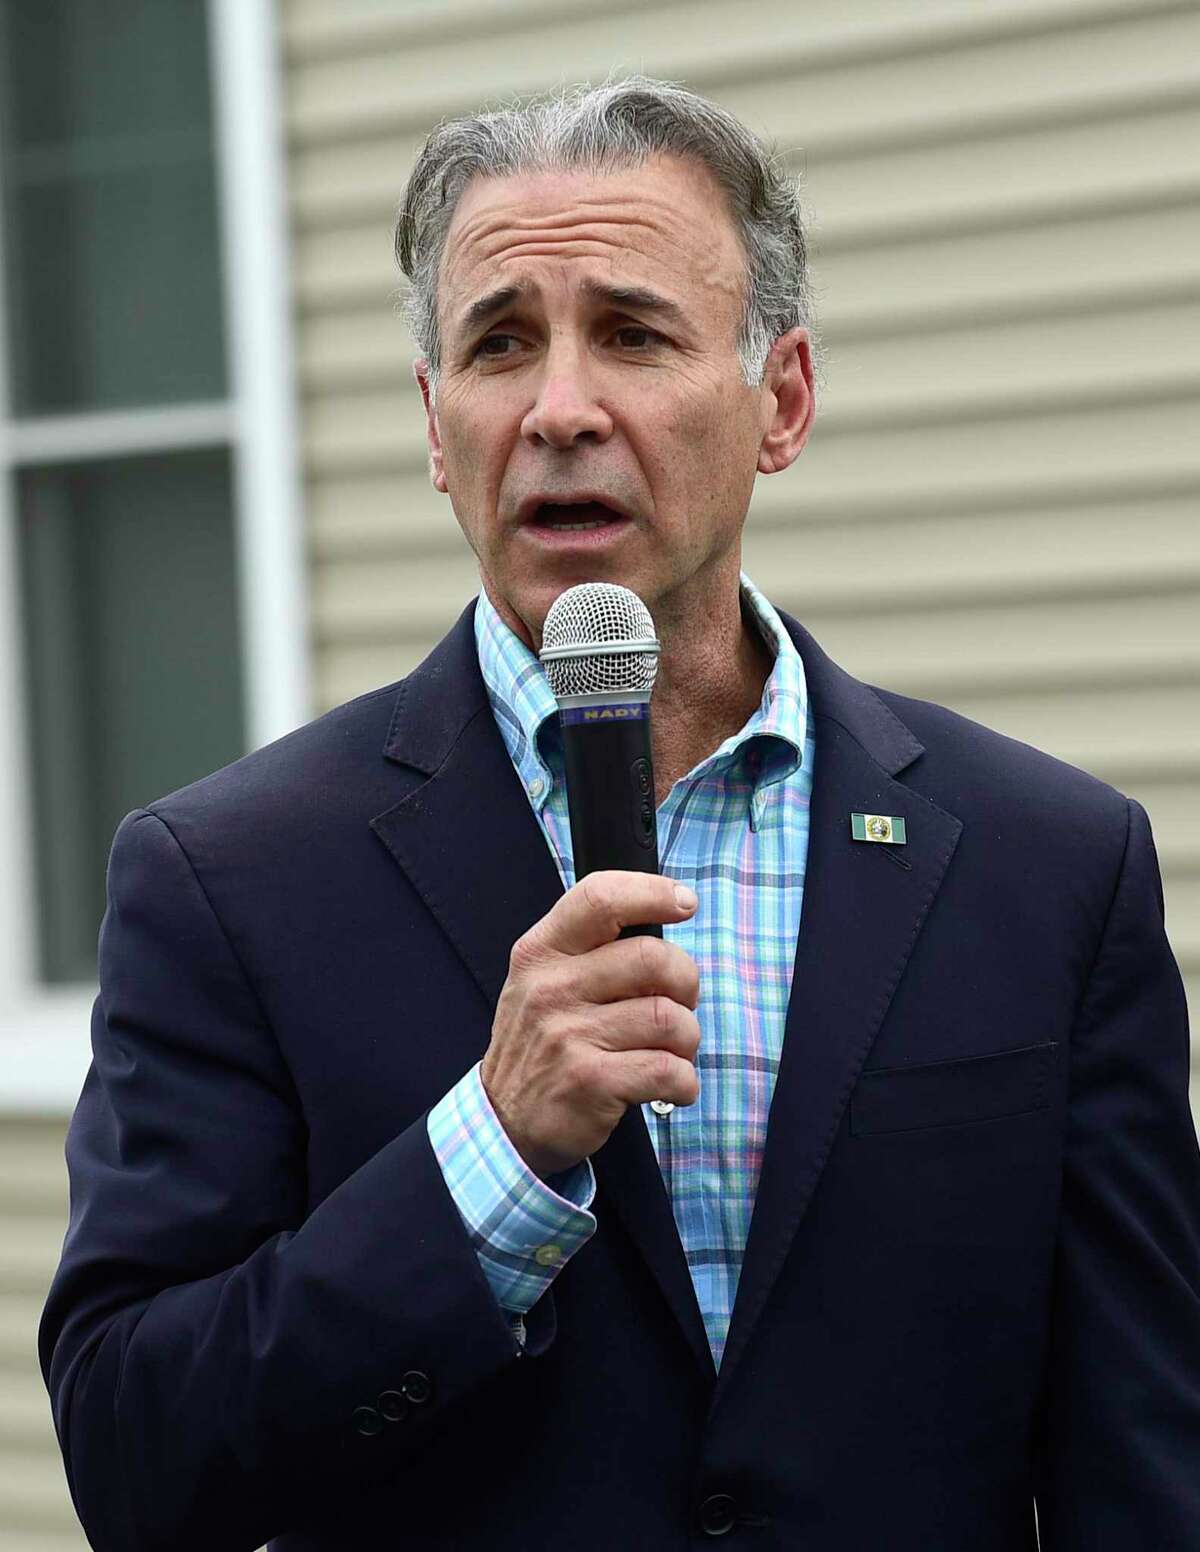 Former First Selectman Fred Camillo speak at a Greenwich Communities plaque dedication at its Armstrong Court affordable housing apartment complex on Saturday, April 10, 2021, in Greenwich, Conn.